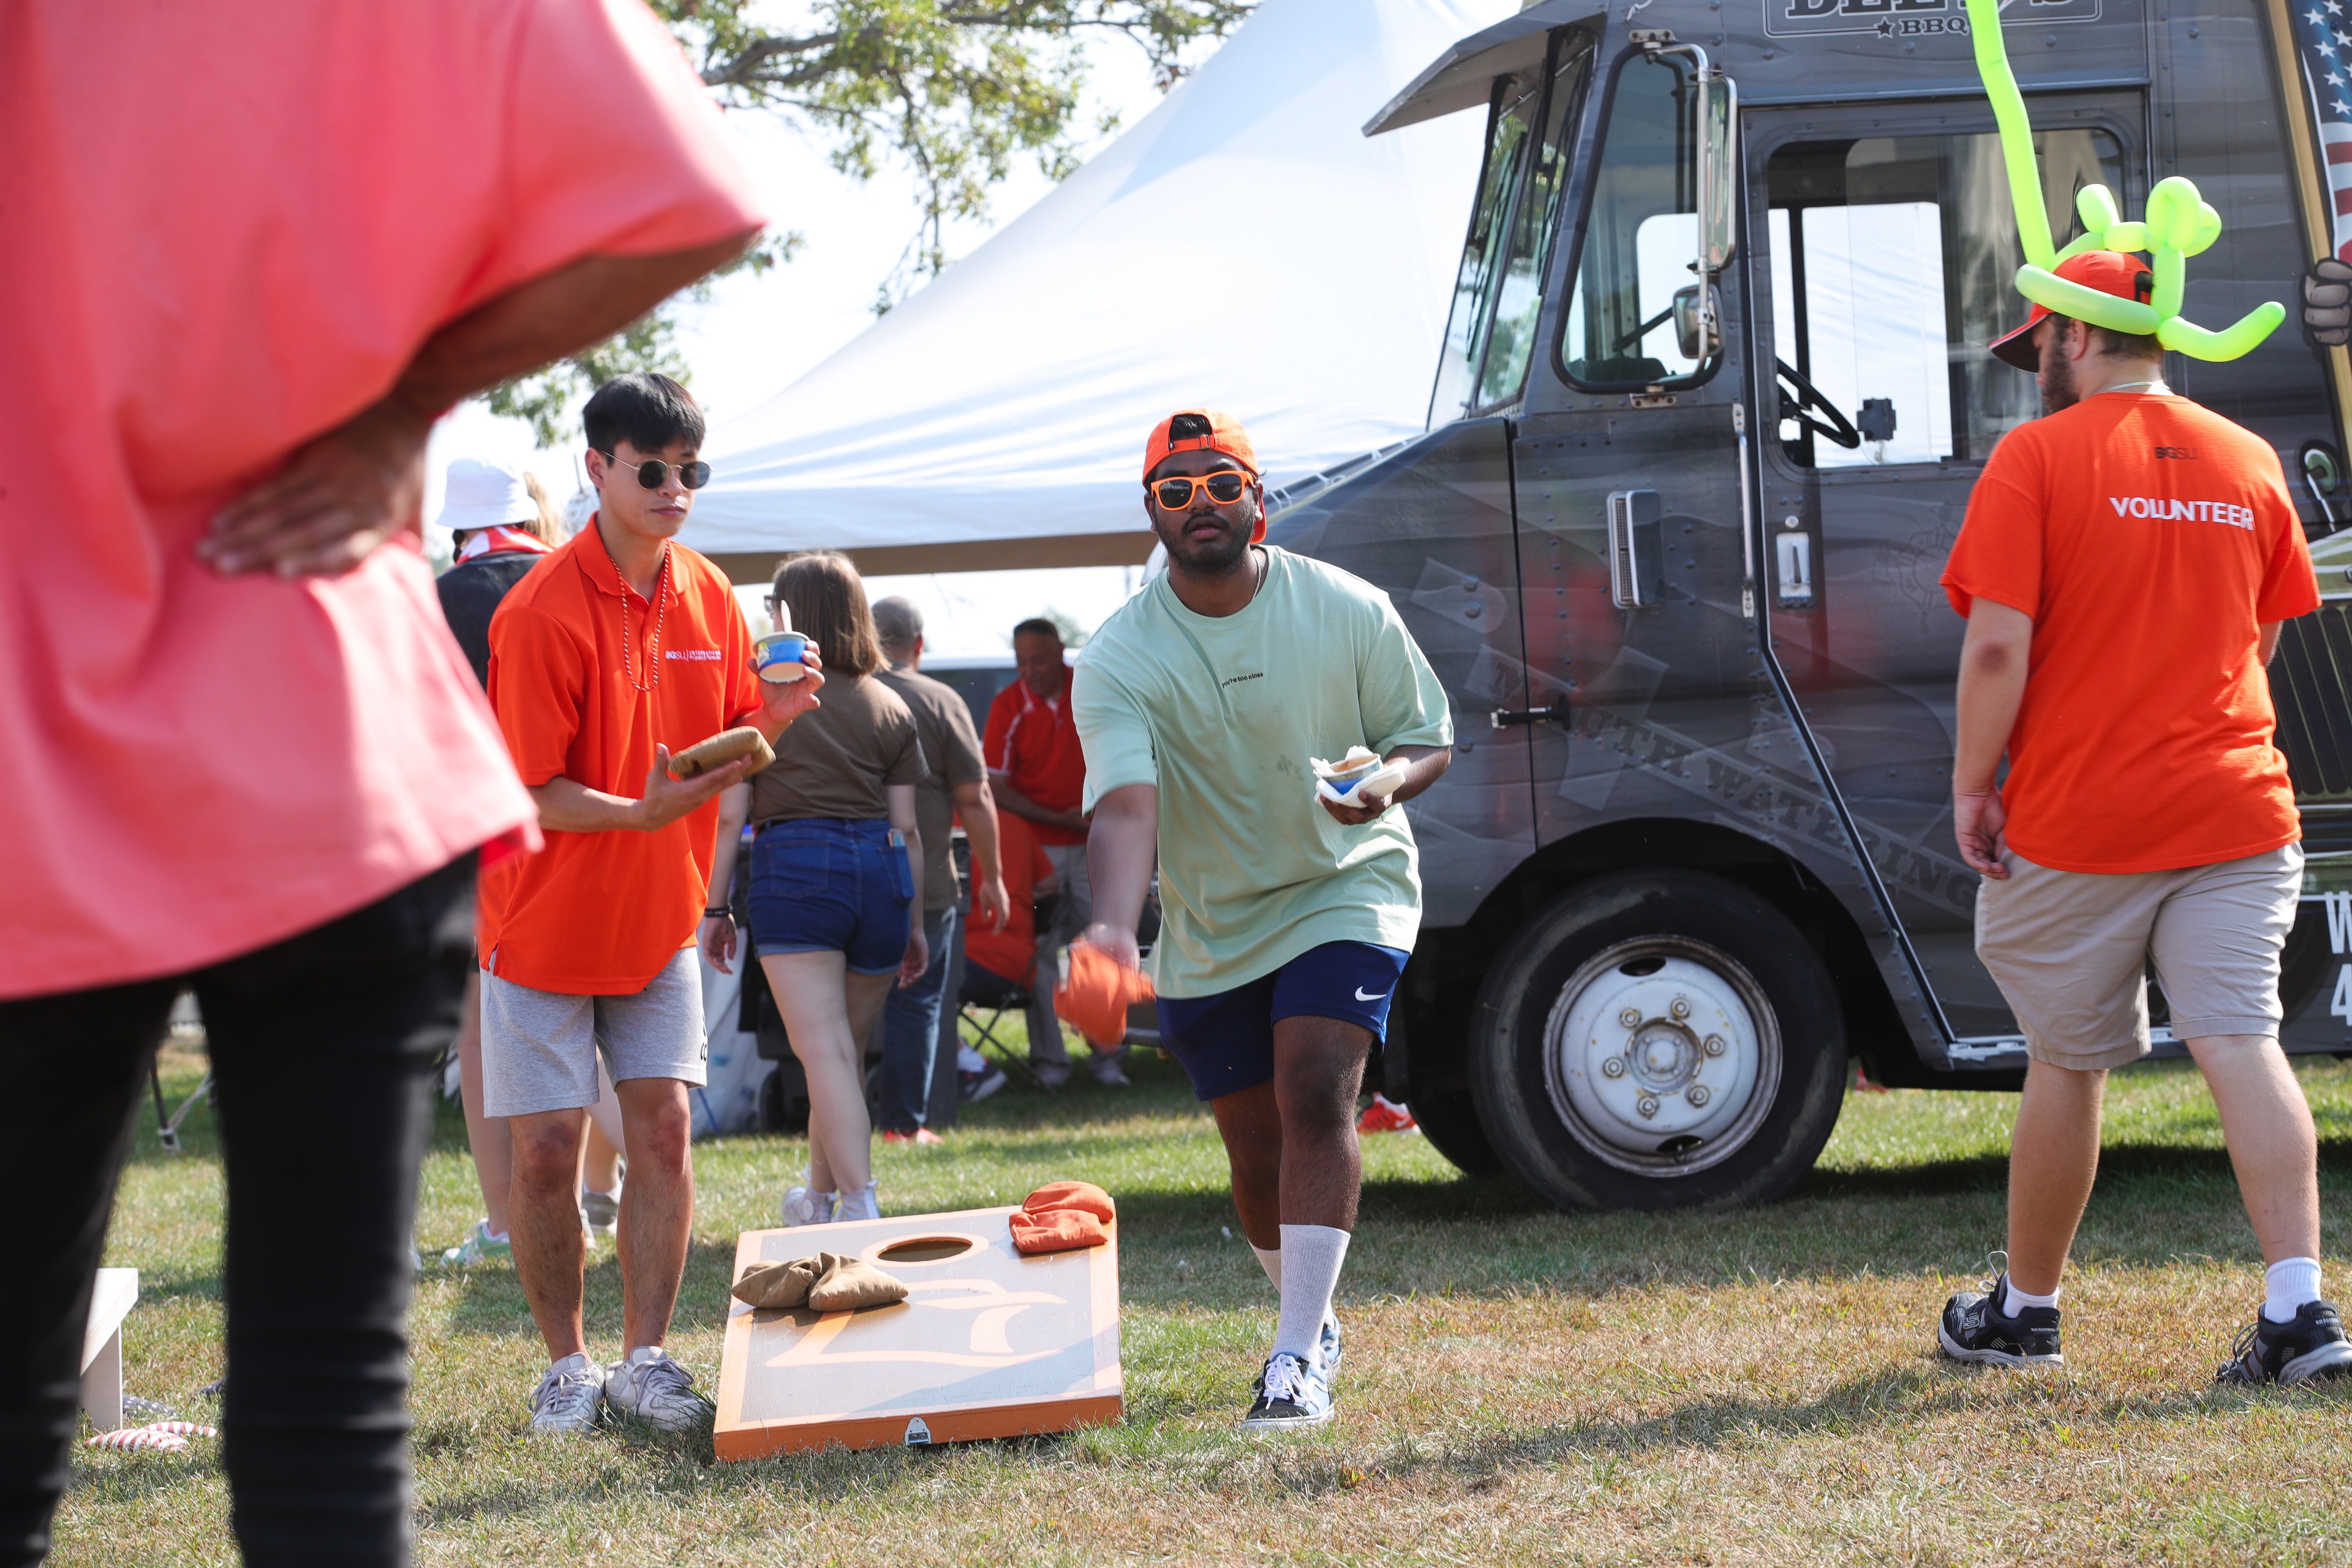 Games were in full swing during tailgating outside Doyt Perry Stadium 